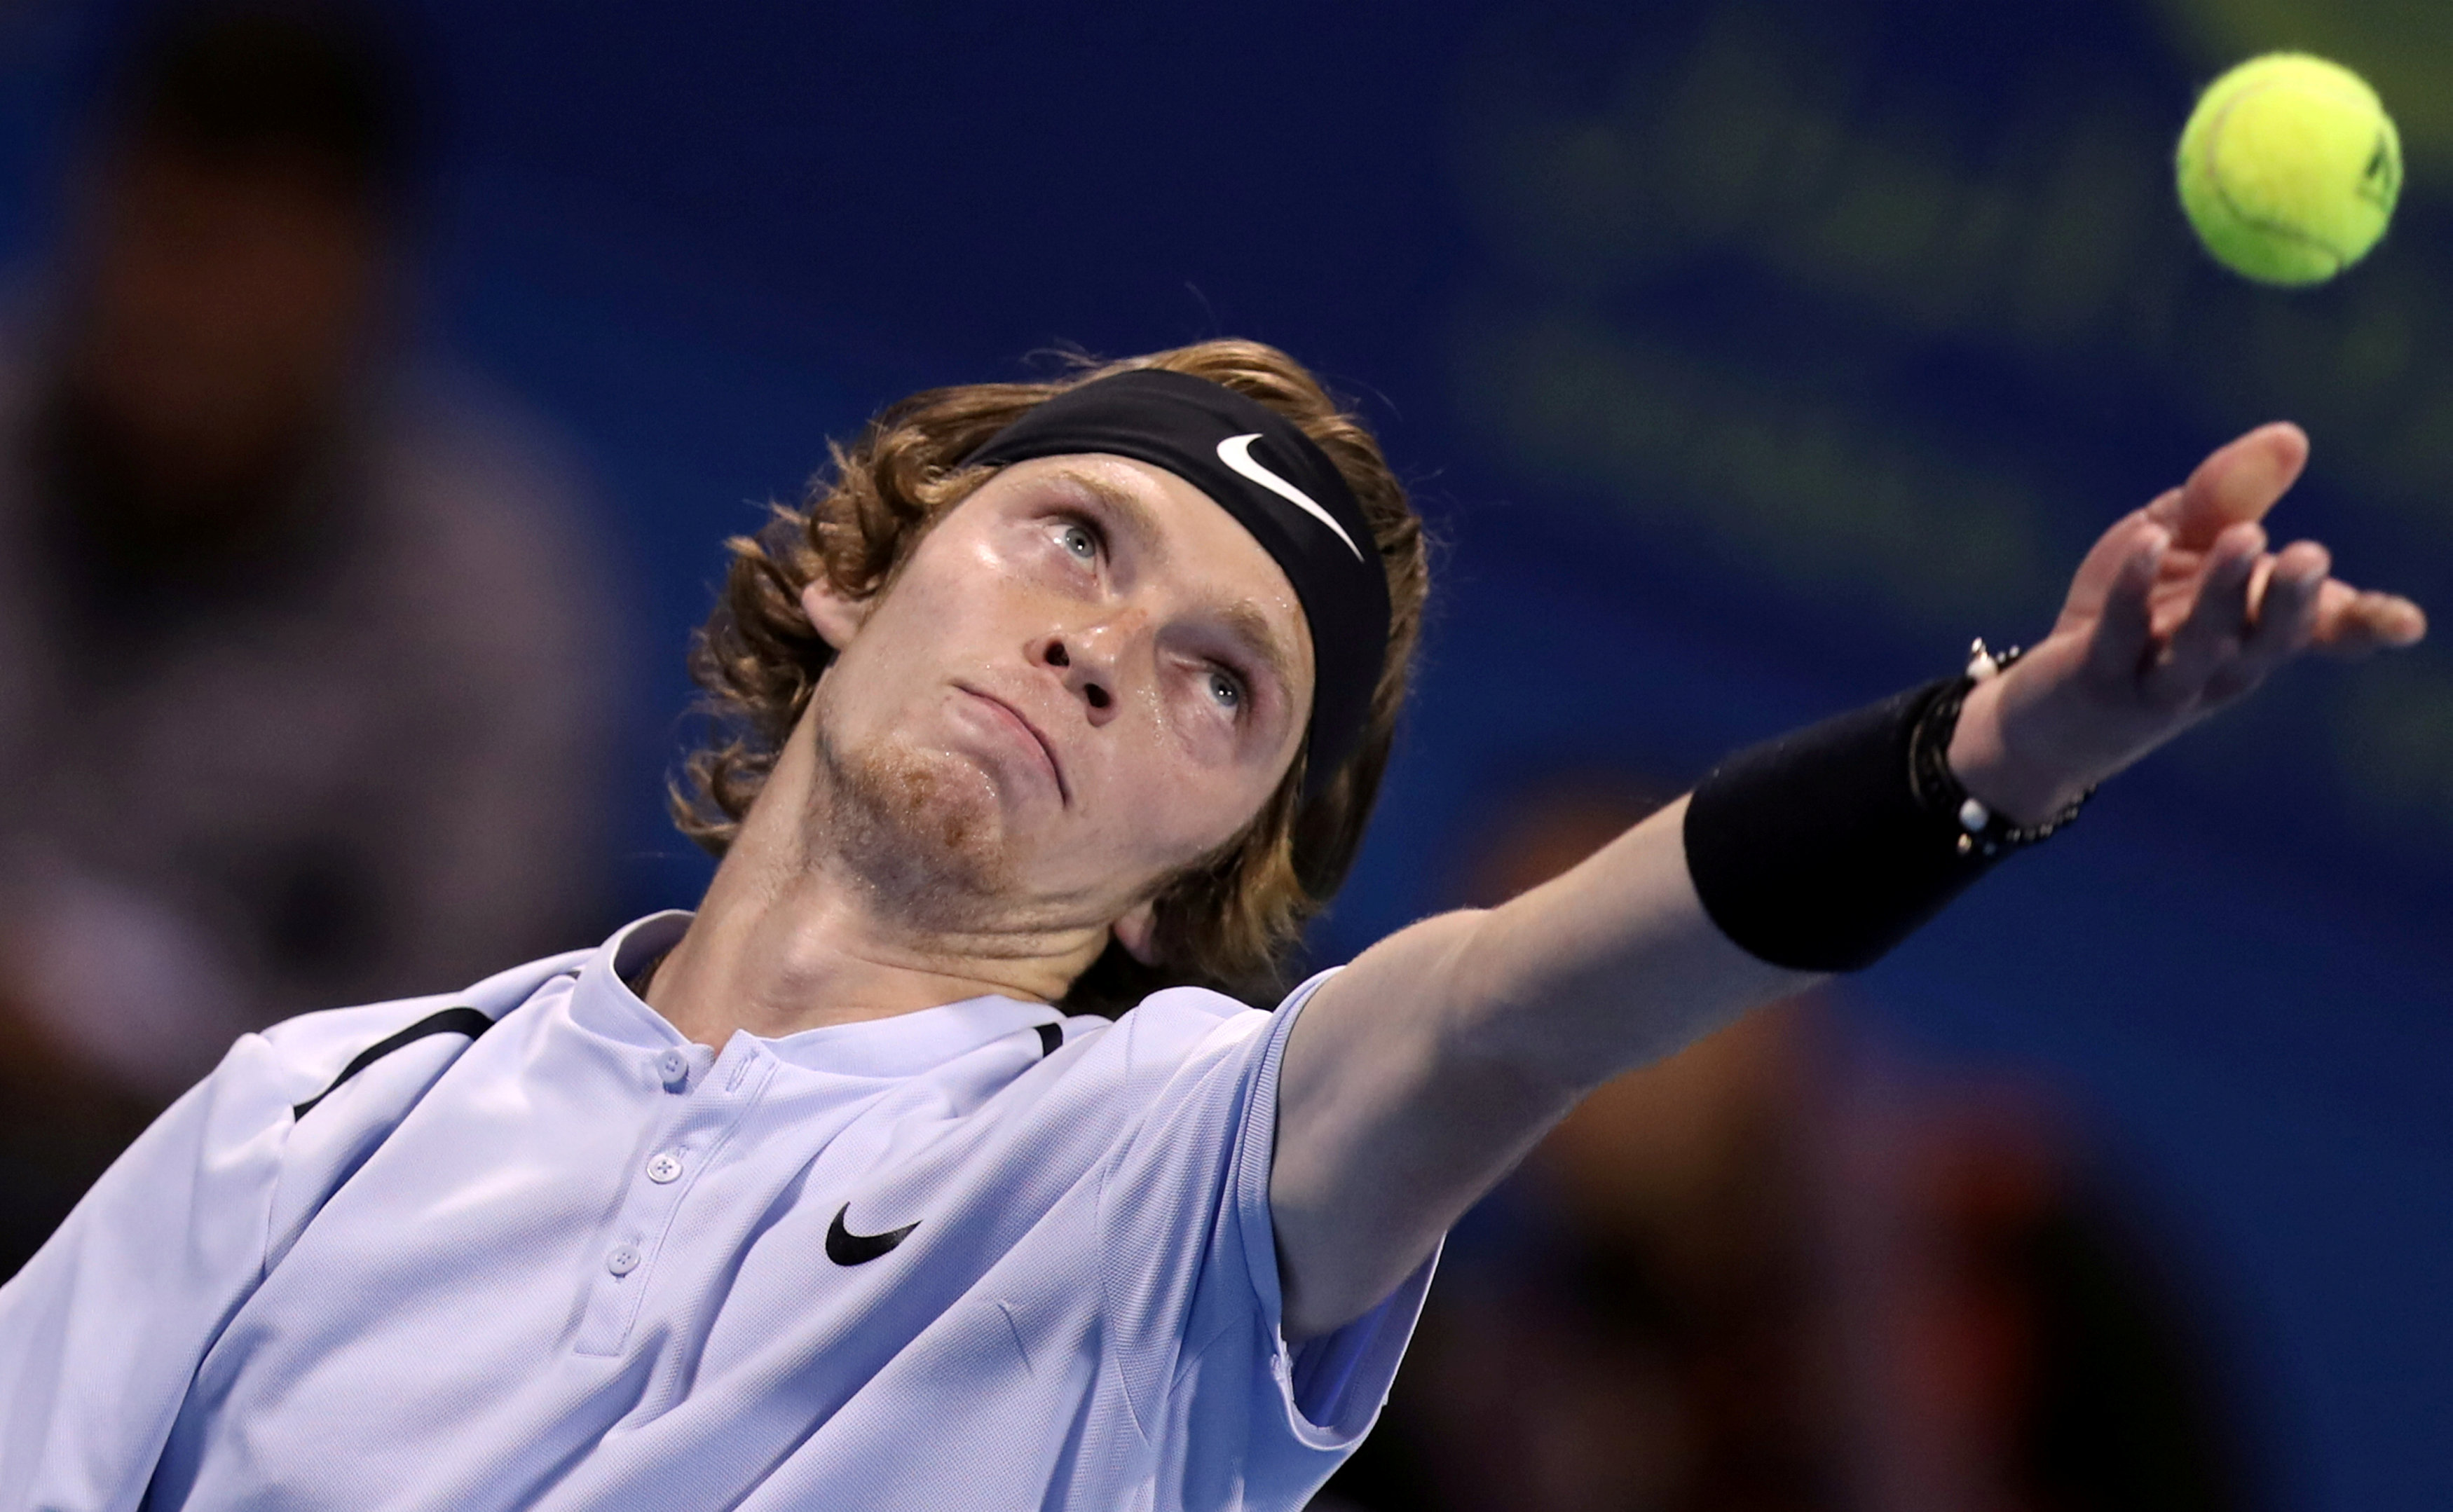 Tennis: Rublev leading the Russian advance into Melbourne